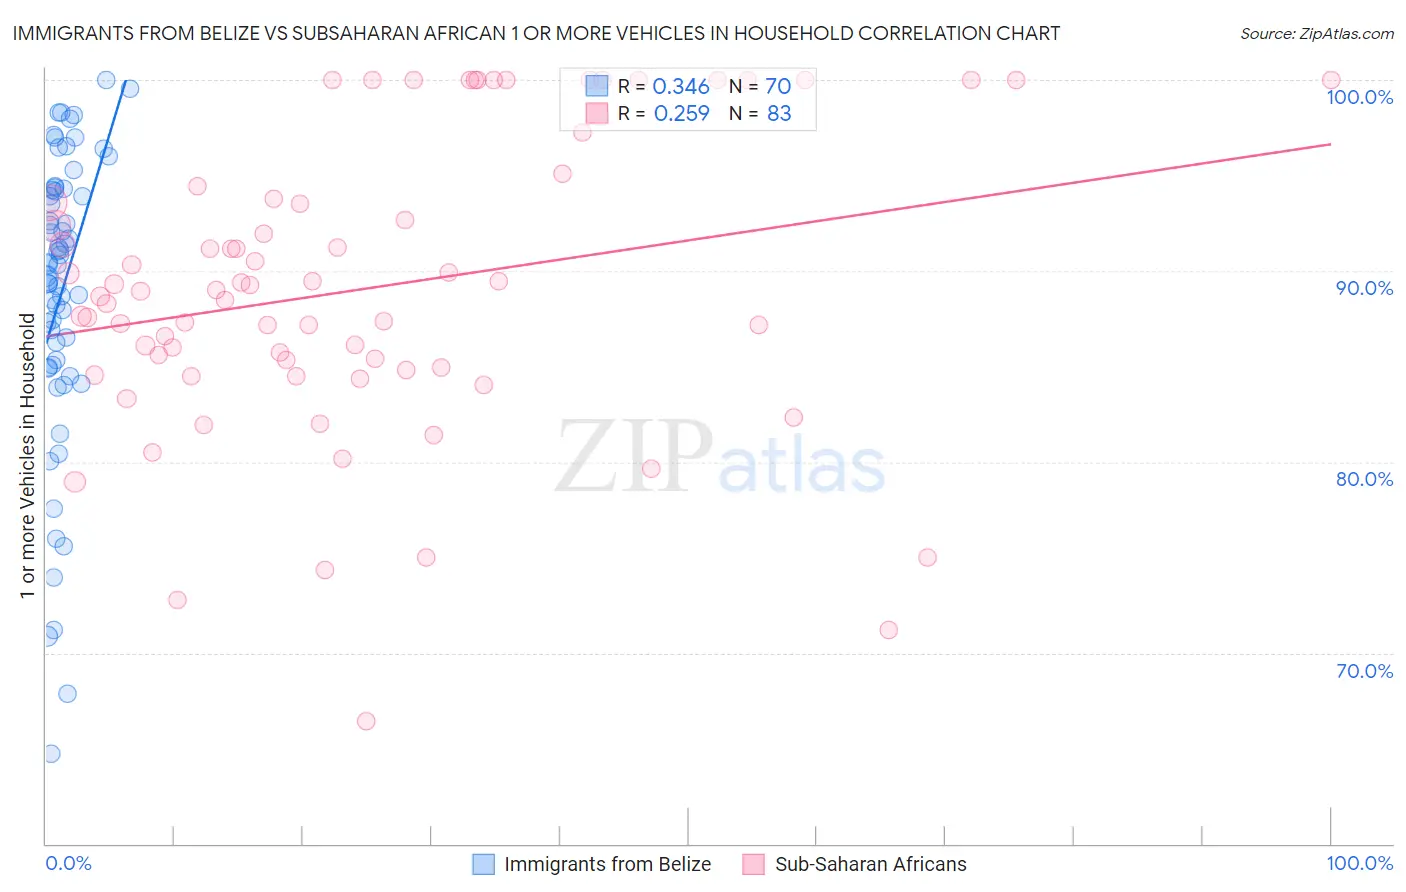 Immigrants from Belize vs Subsaharan African 1 or more Vehicles in Household